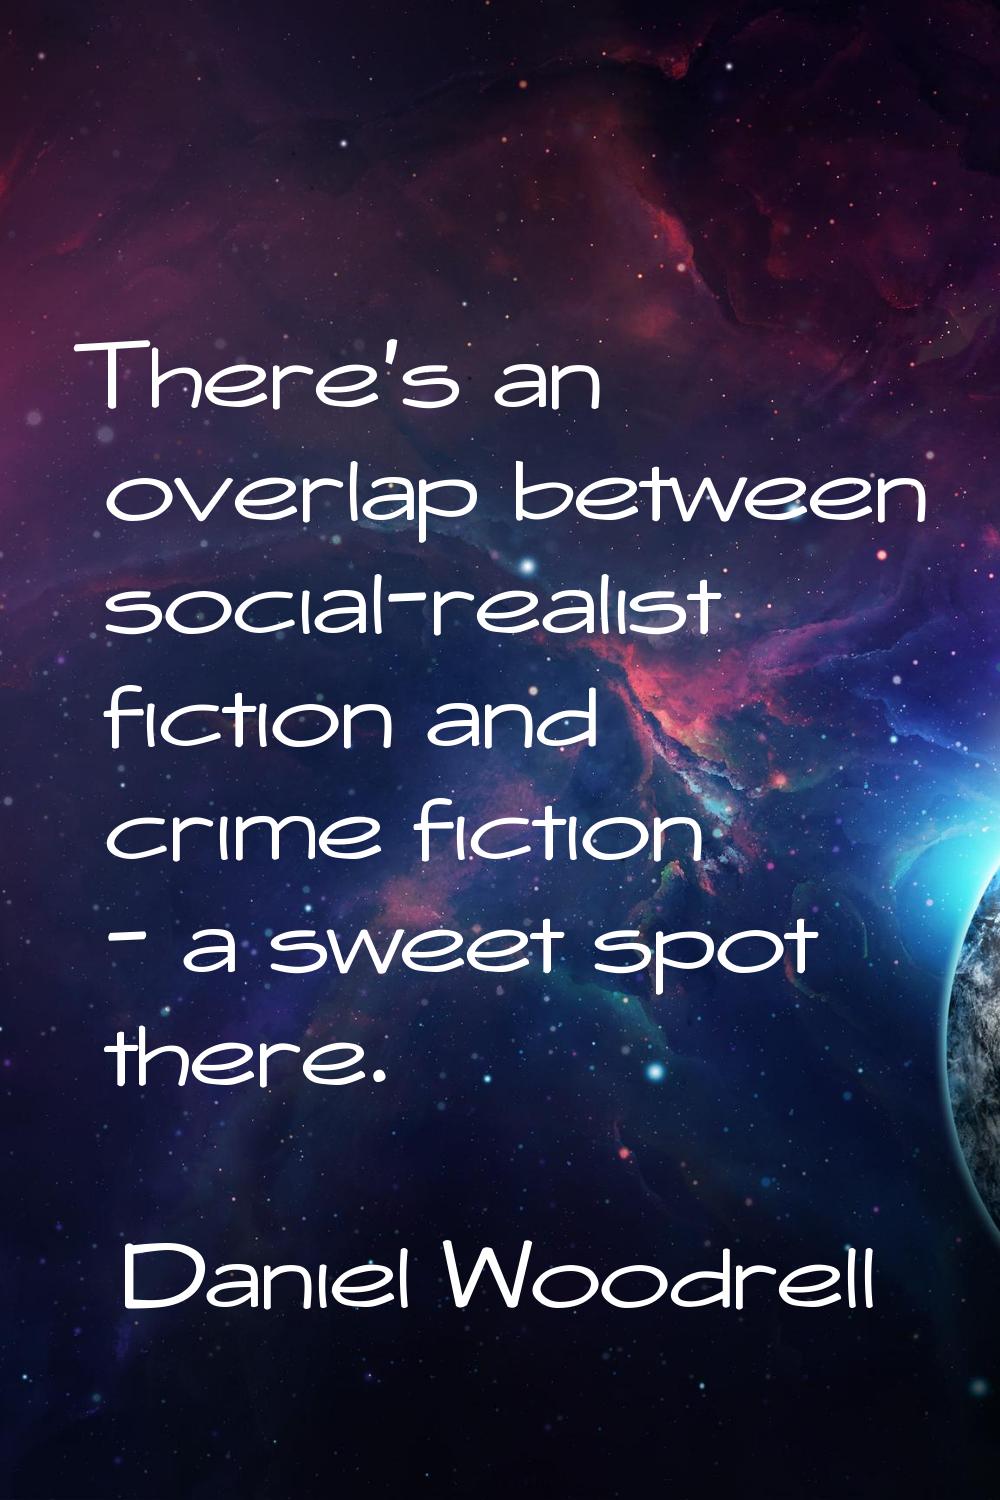 There's an overlap between social-realist fiction and crime fiction - a sweet spot there.